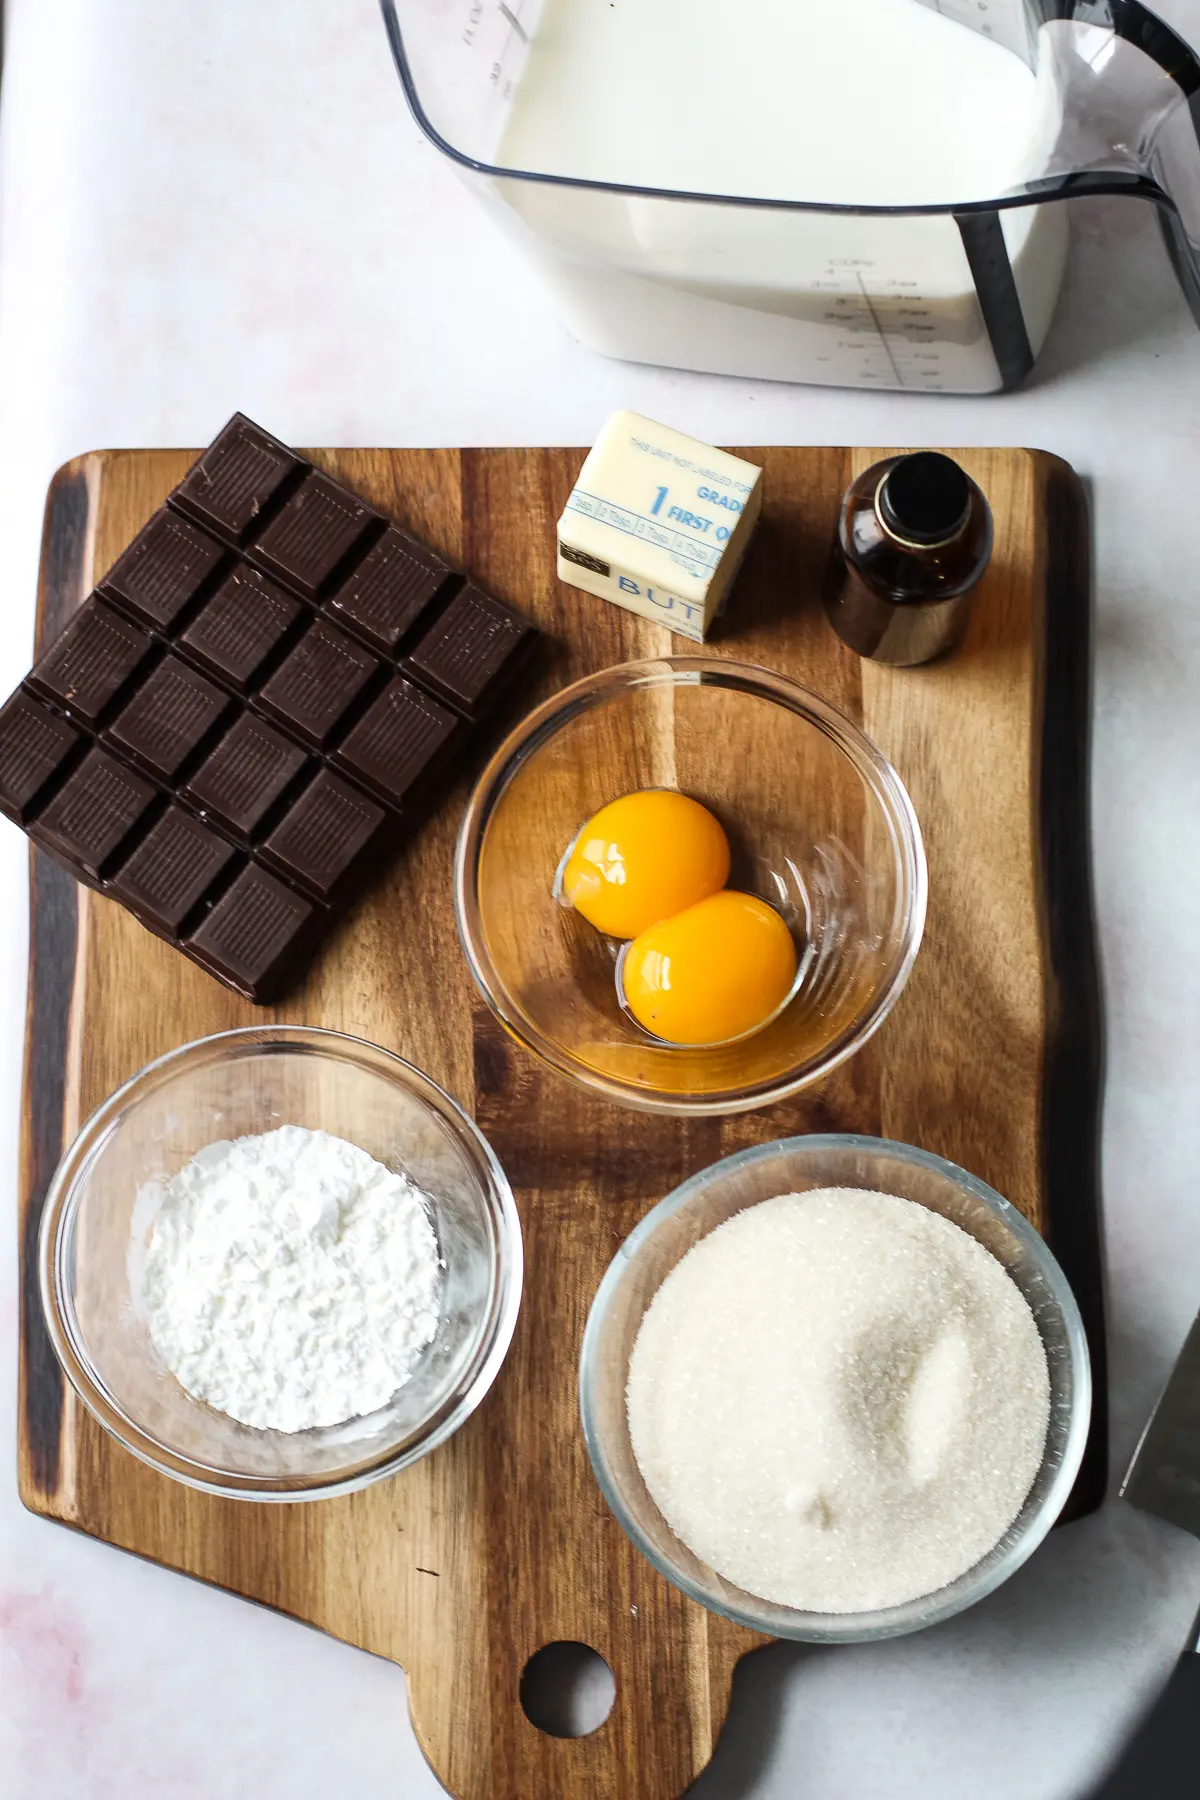 Ingredients for homemade chocolate pudding.